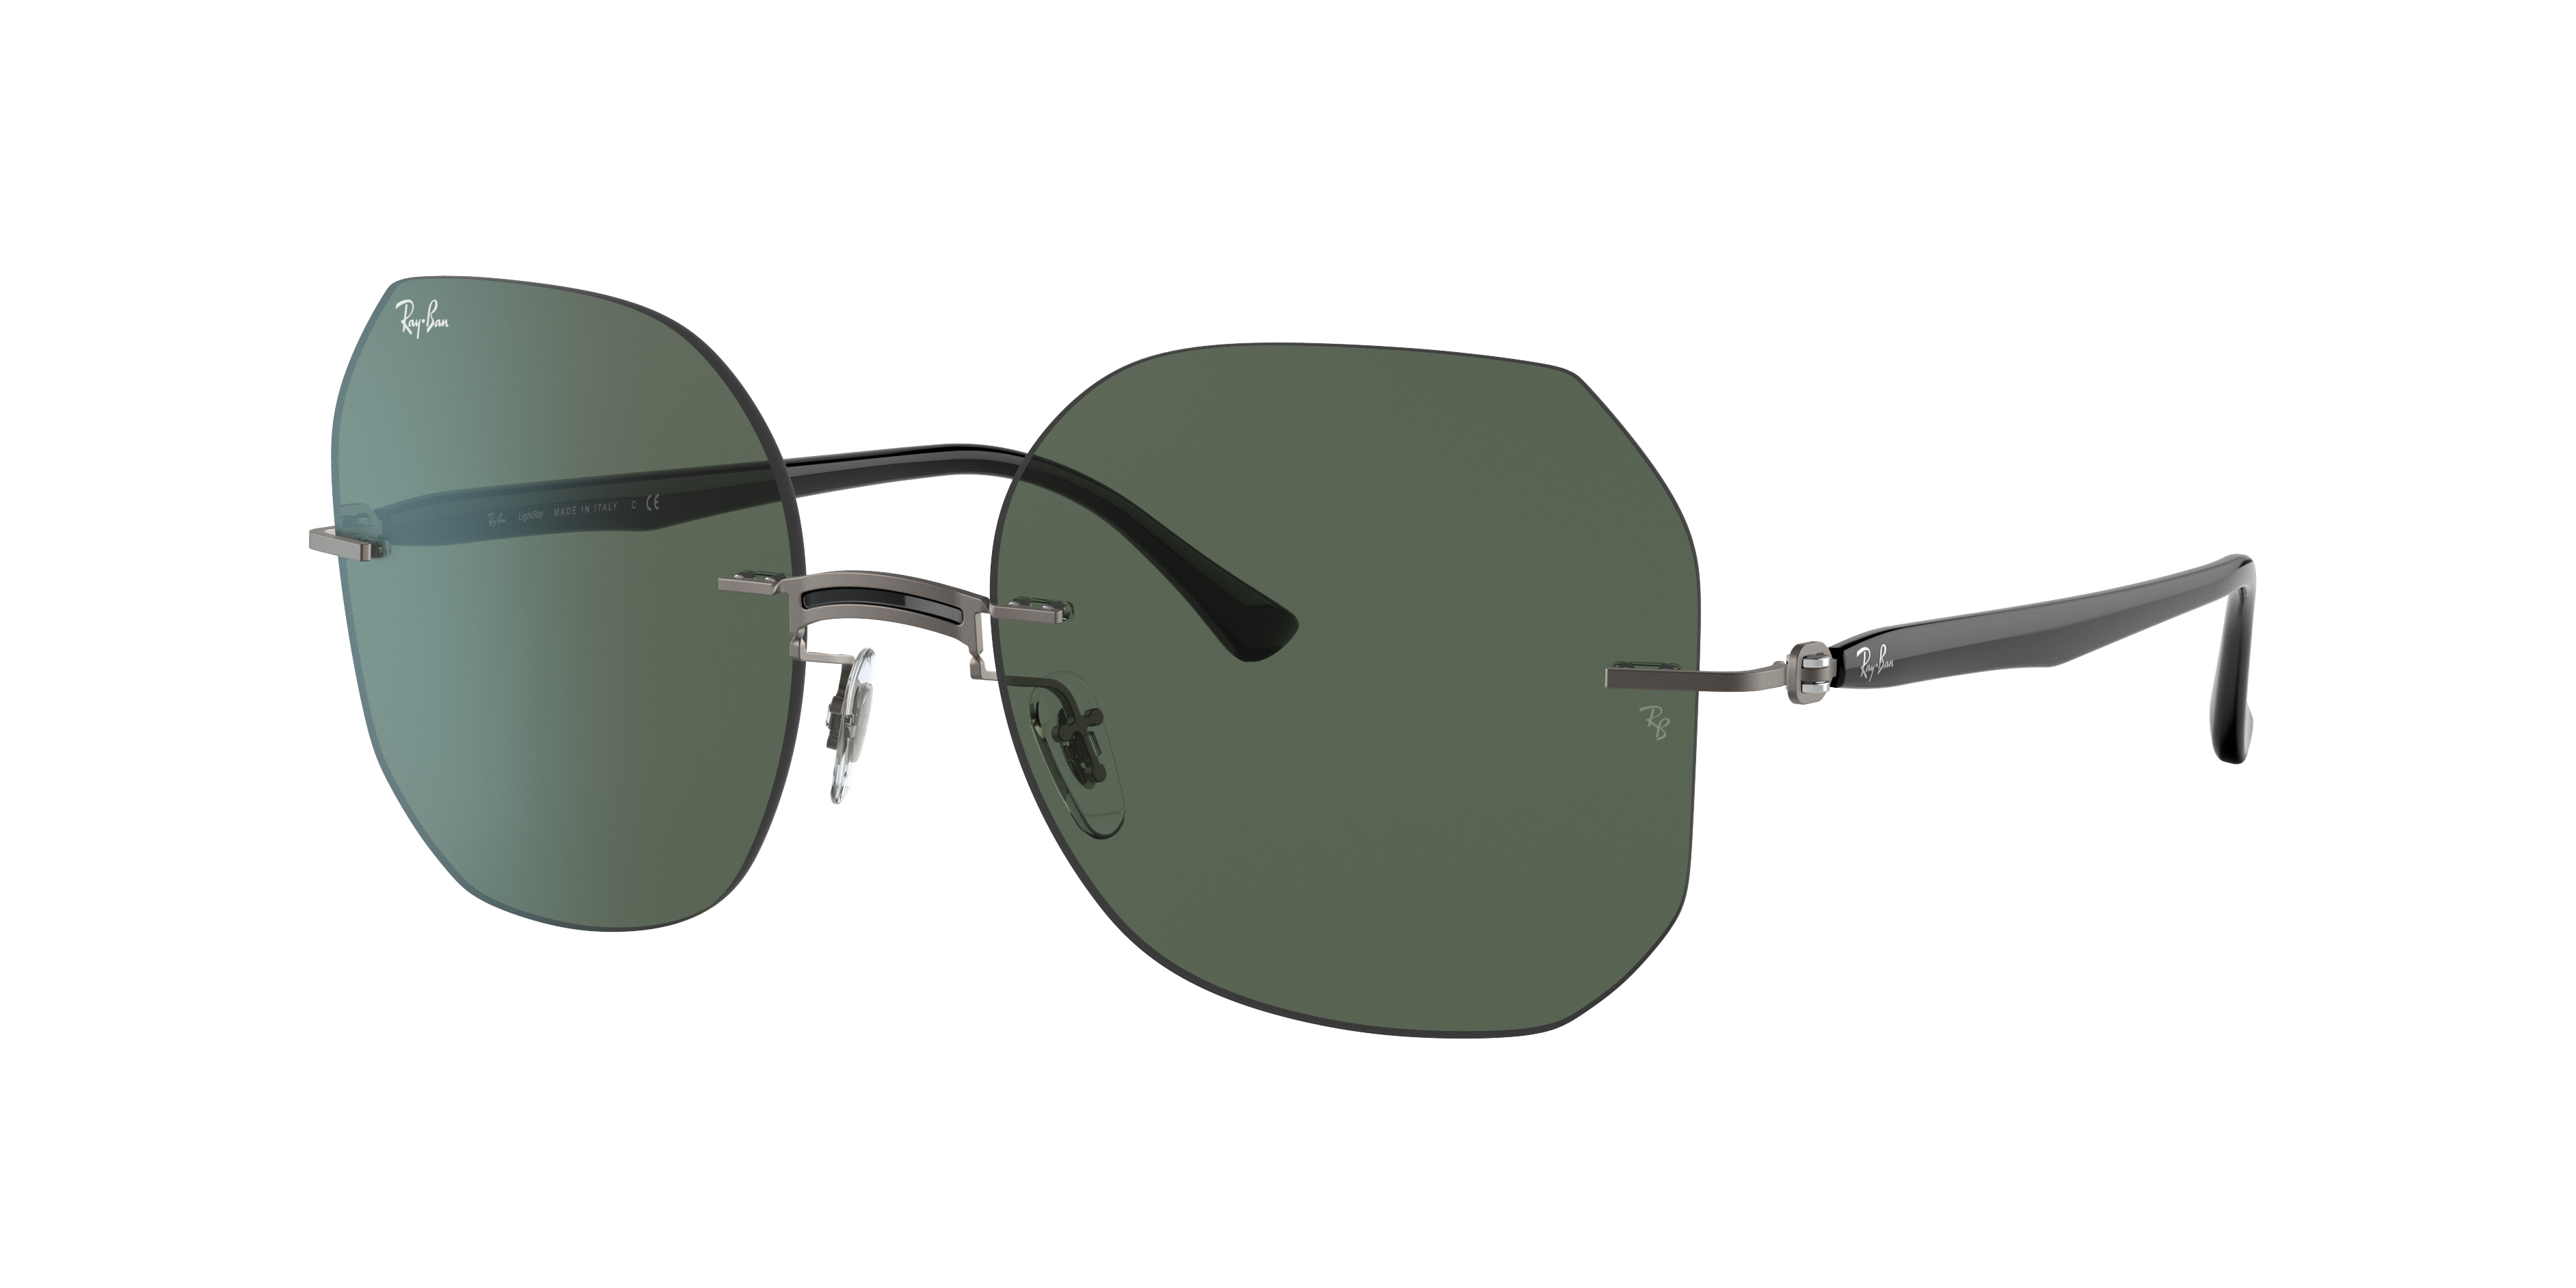 Ray Ban Rb8067 Sunglasses In Black